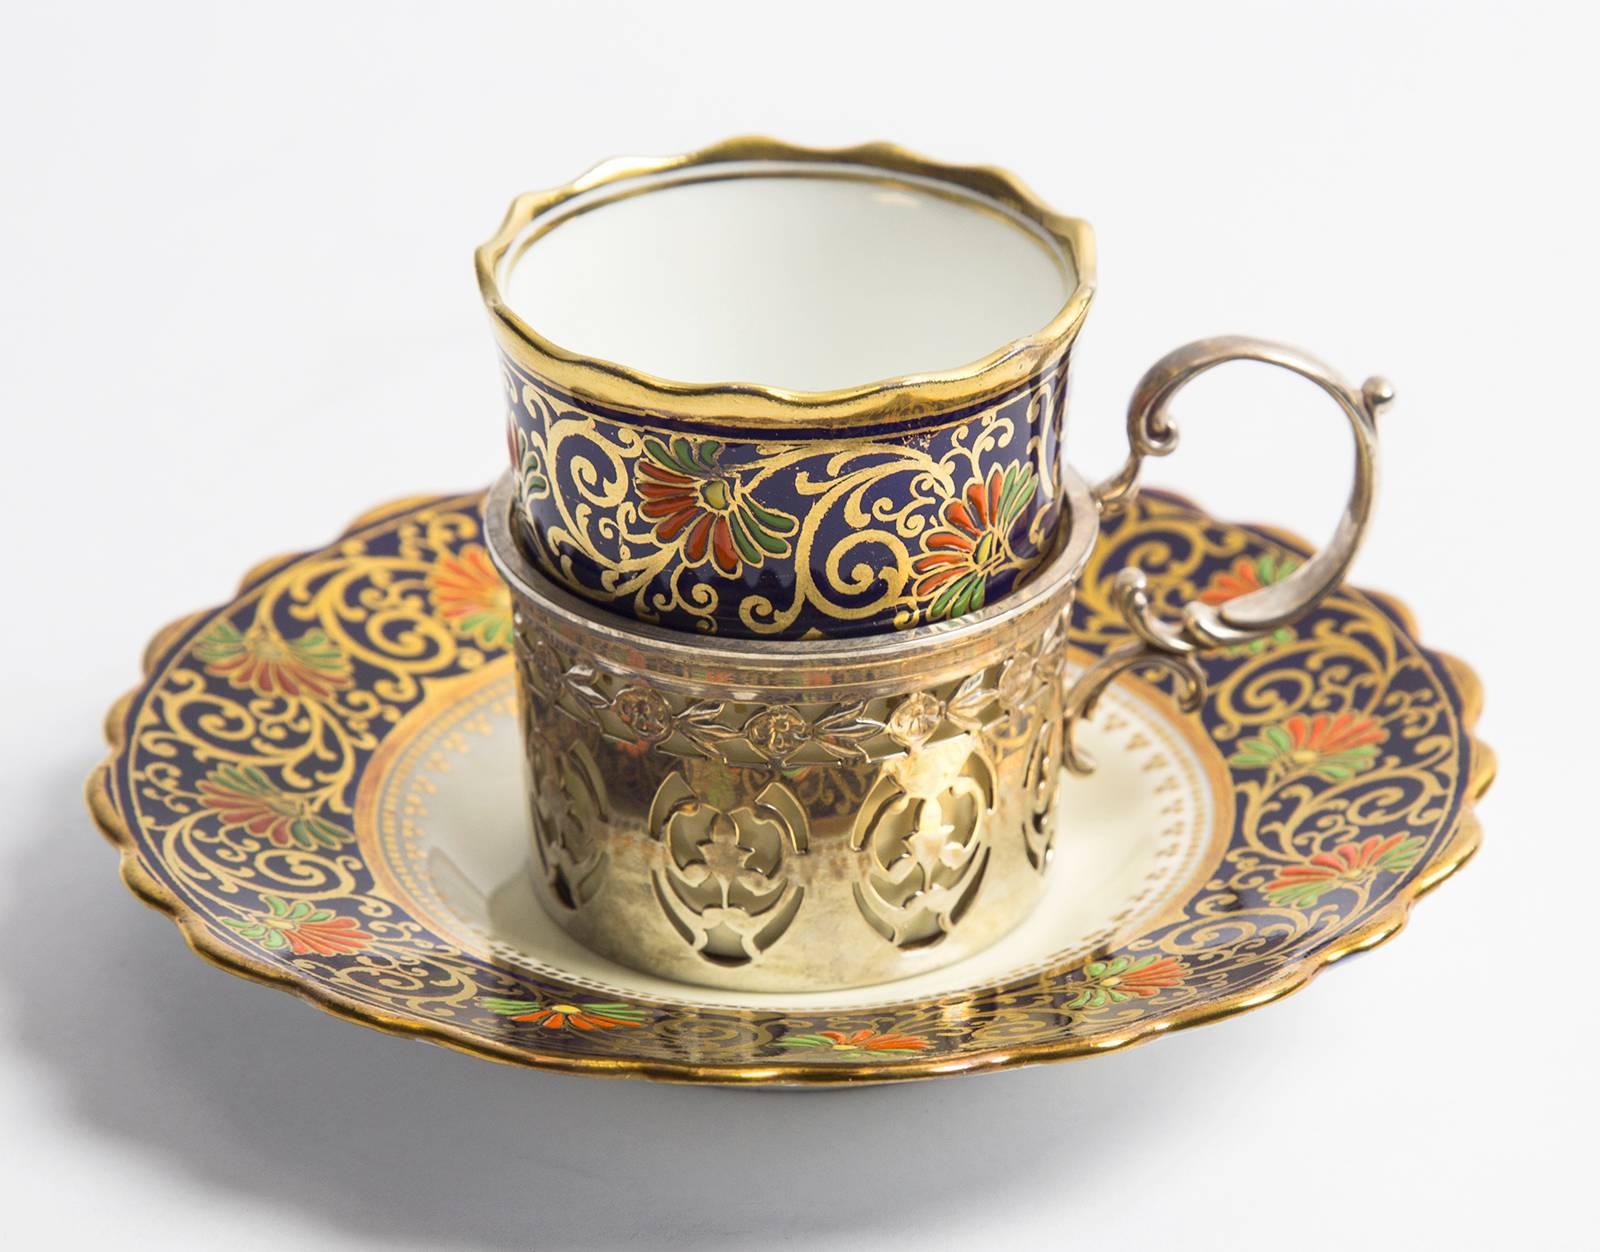 Beautiful Demitasse set, comprising eight Birks sterling silver cup holders with eight Aynsley, England bone china porcelain cup inserts and eight saucers. Each piece is encompassed by coral and green floral designs on cobalt blue ground, enhanced